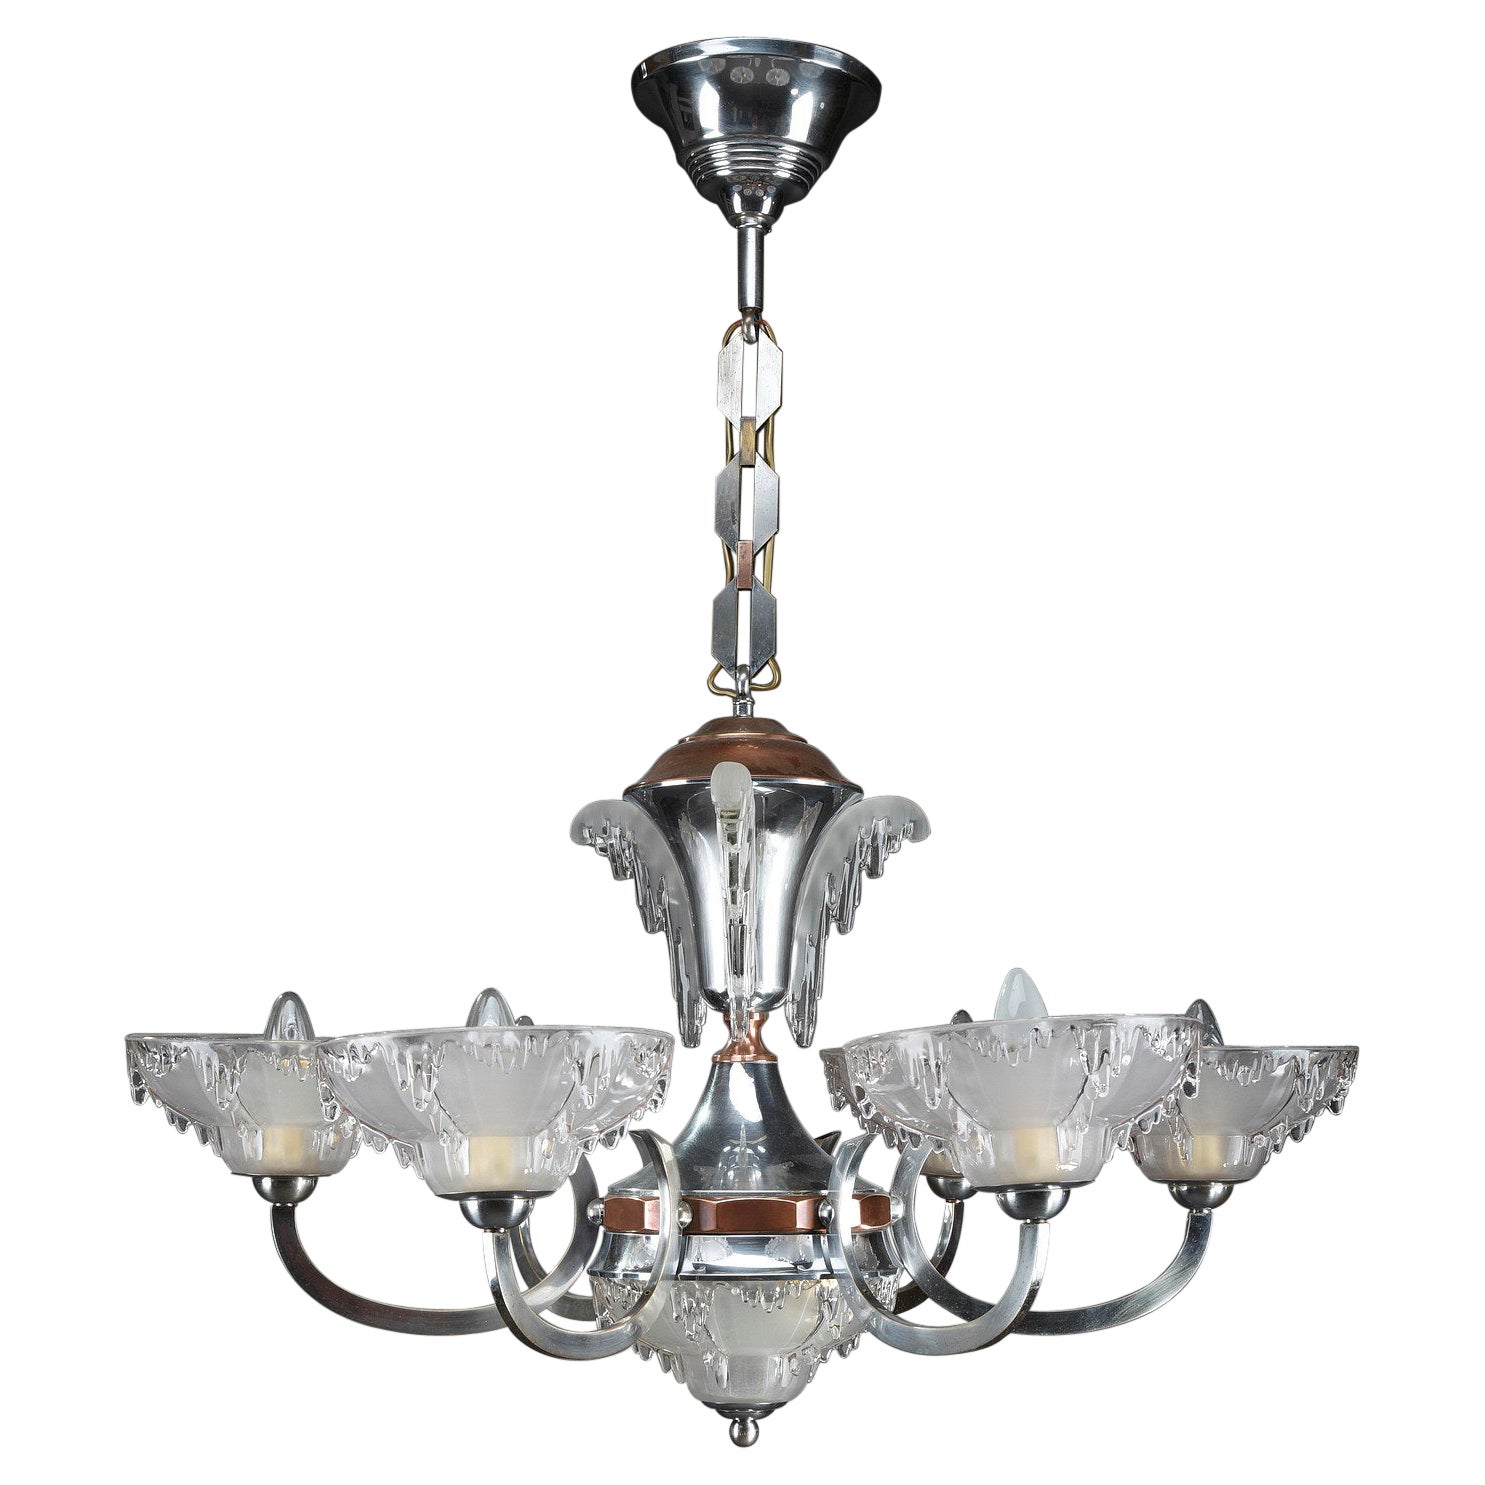 Art Deco Chandelier in Nickel-Plated Metal and Copper For Sale